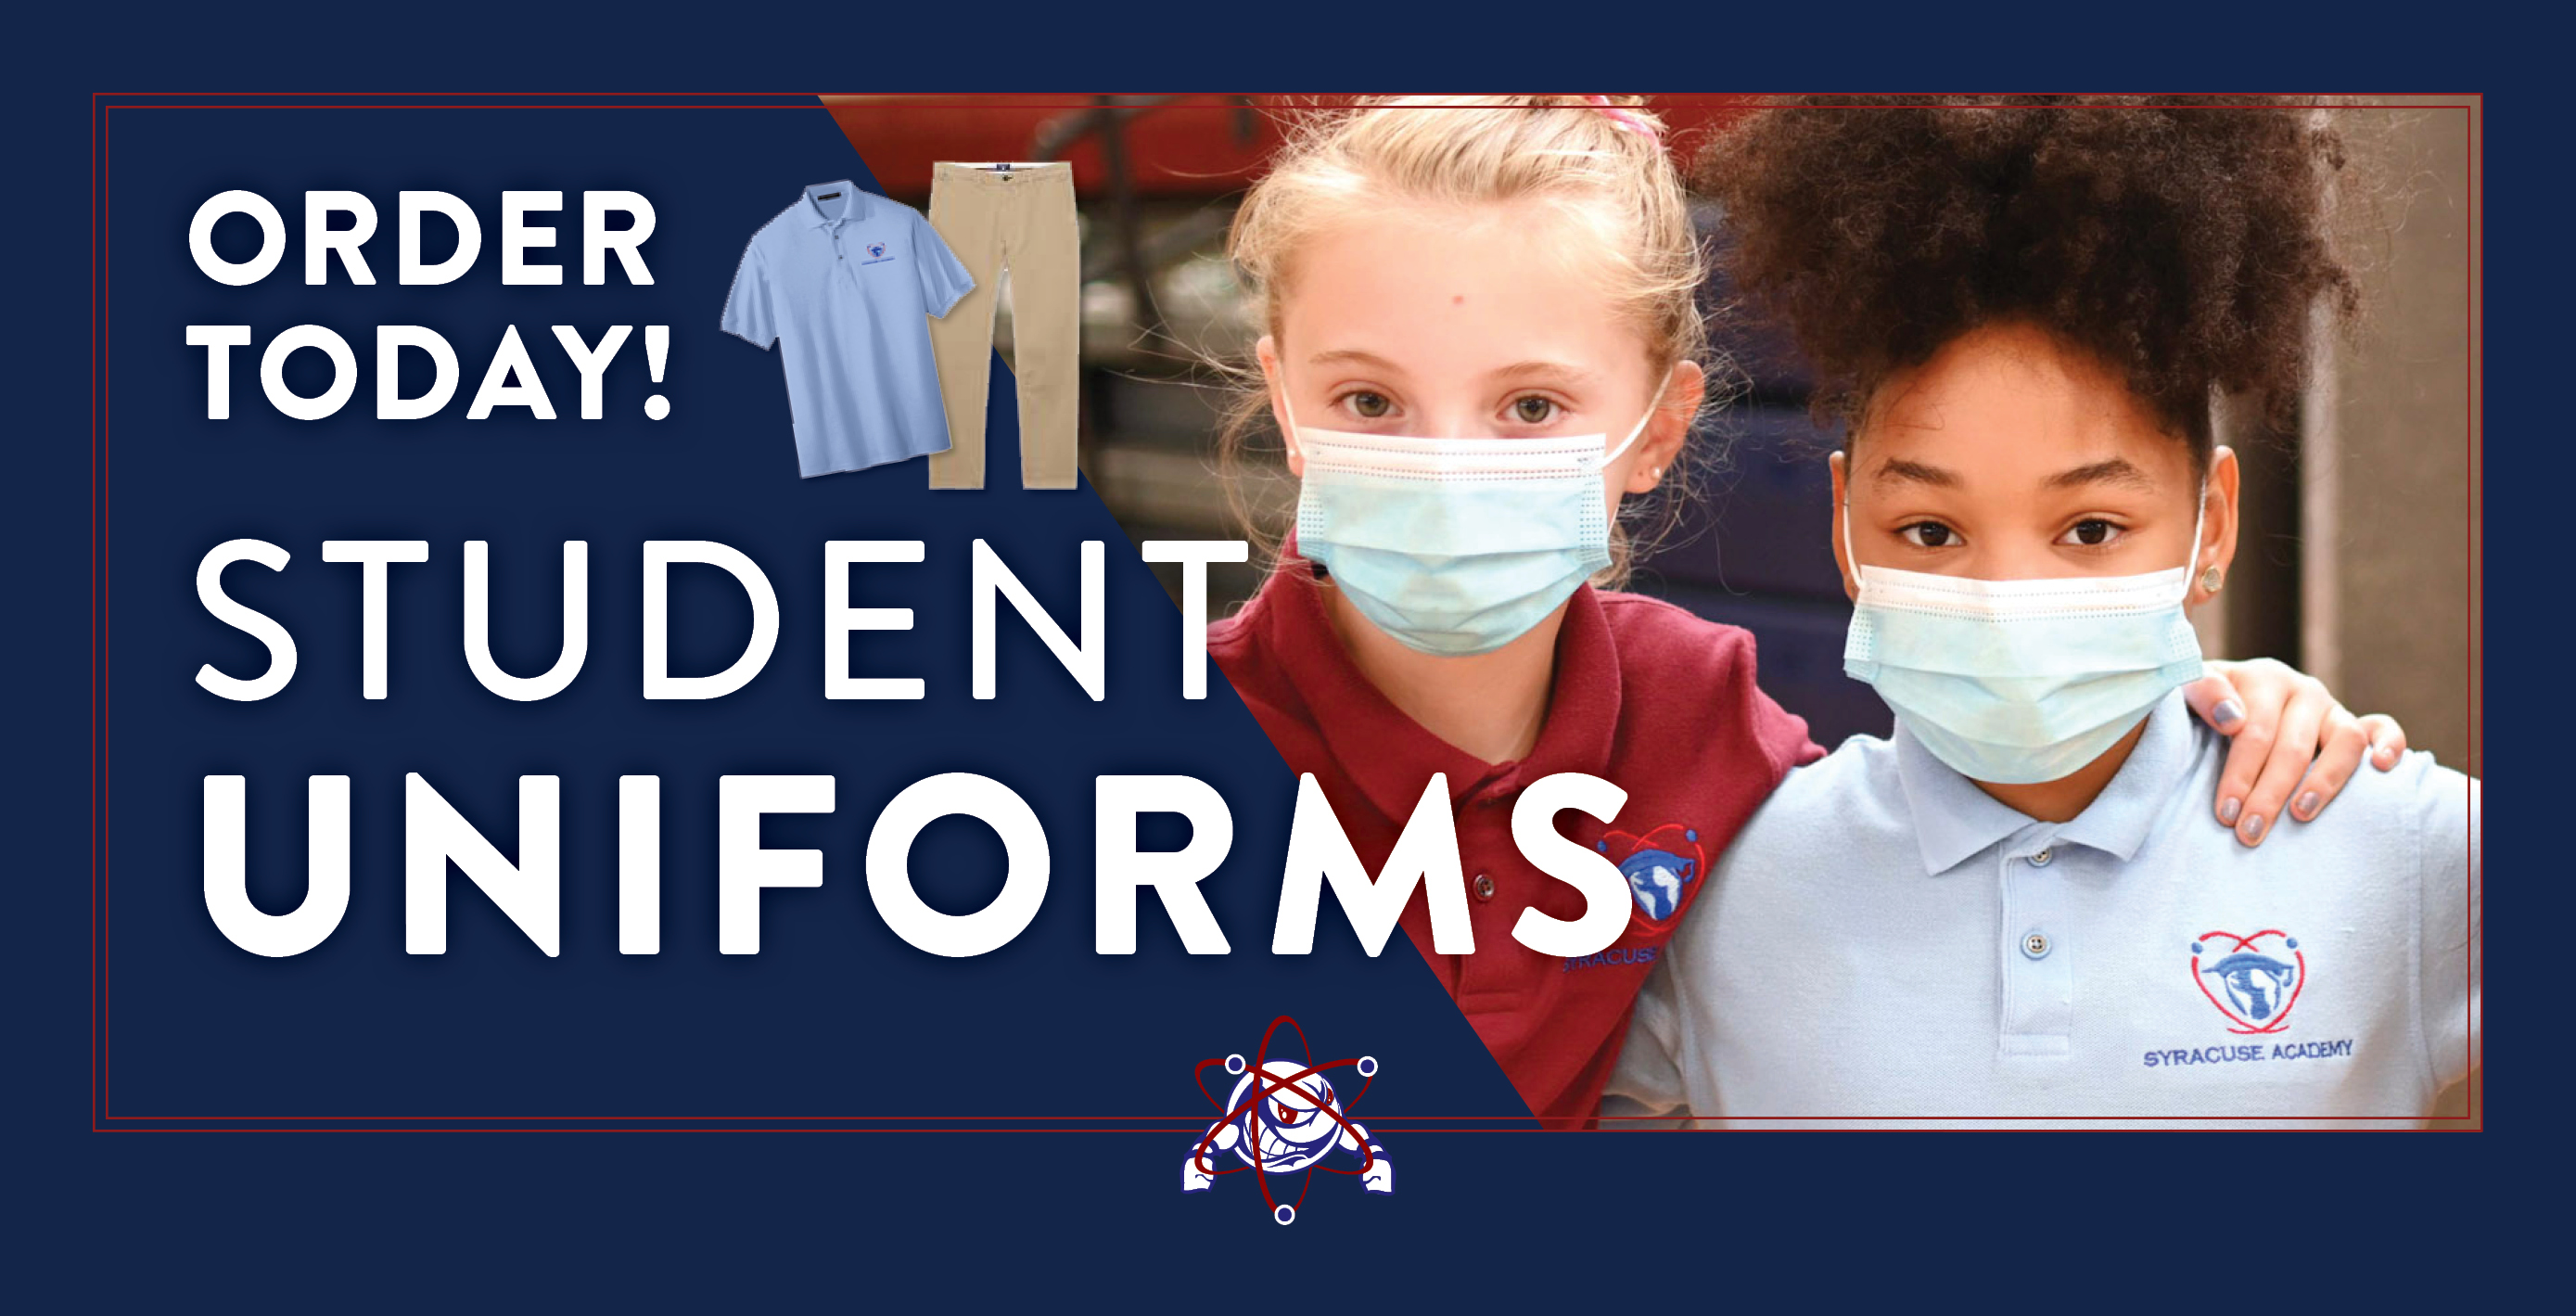 Syracuse Academy of Science reminds its families to order their student’s school uniform as soon as possible to ensure their Atom is ready for the first day of school. All school uniform orders must be placed online and will be shipped directly to your home.